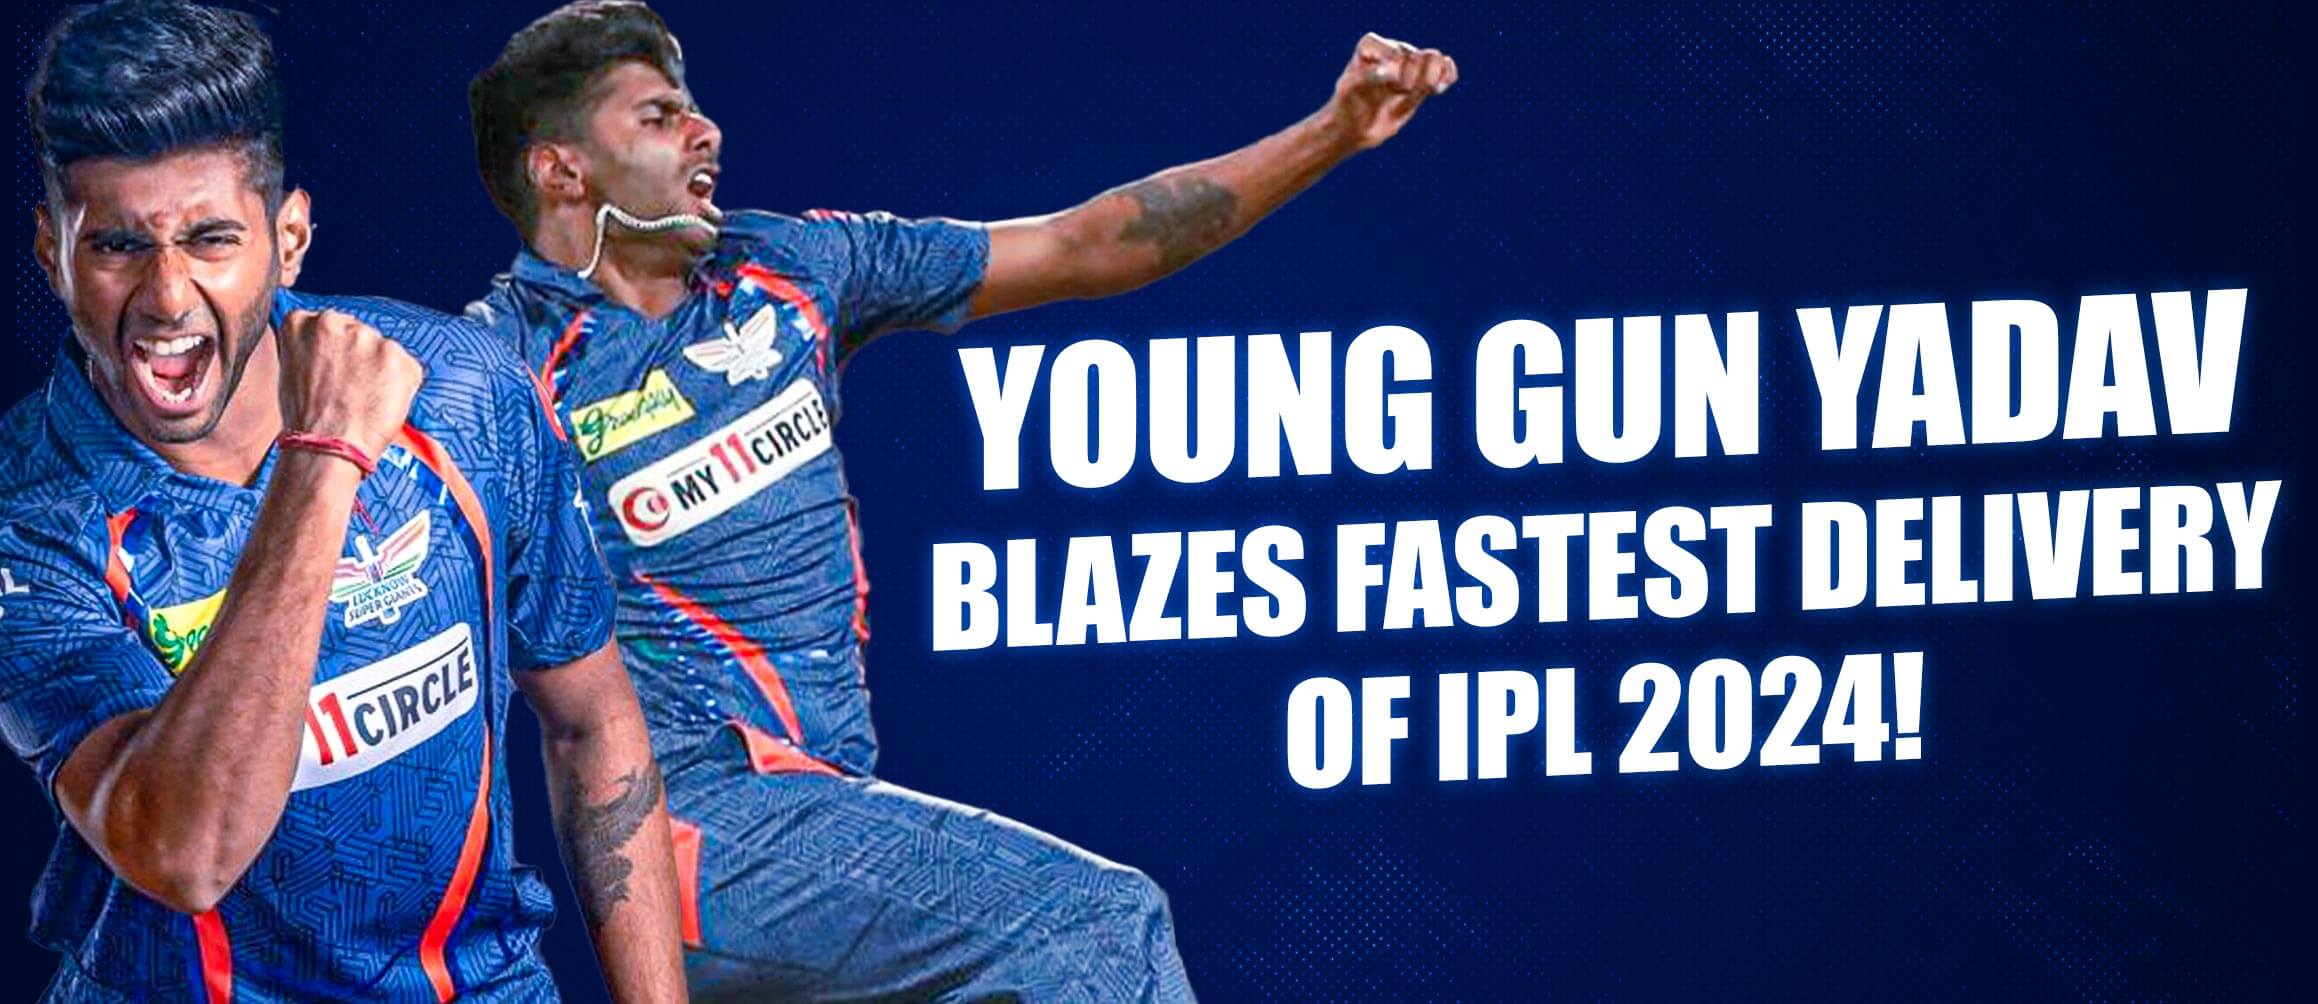 Young Gun Yadav Blazes Fastest Delivery of IPL 2024!